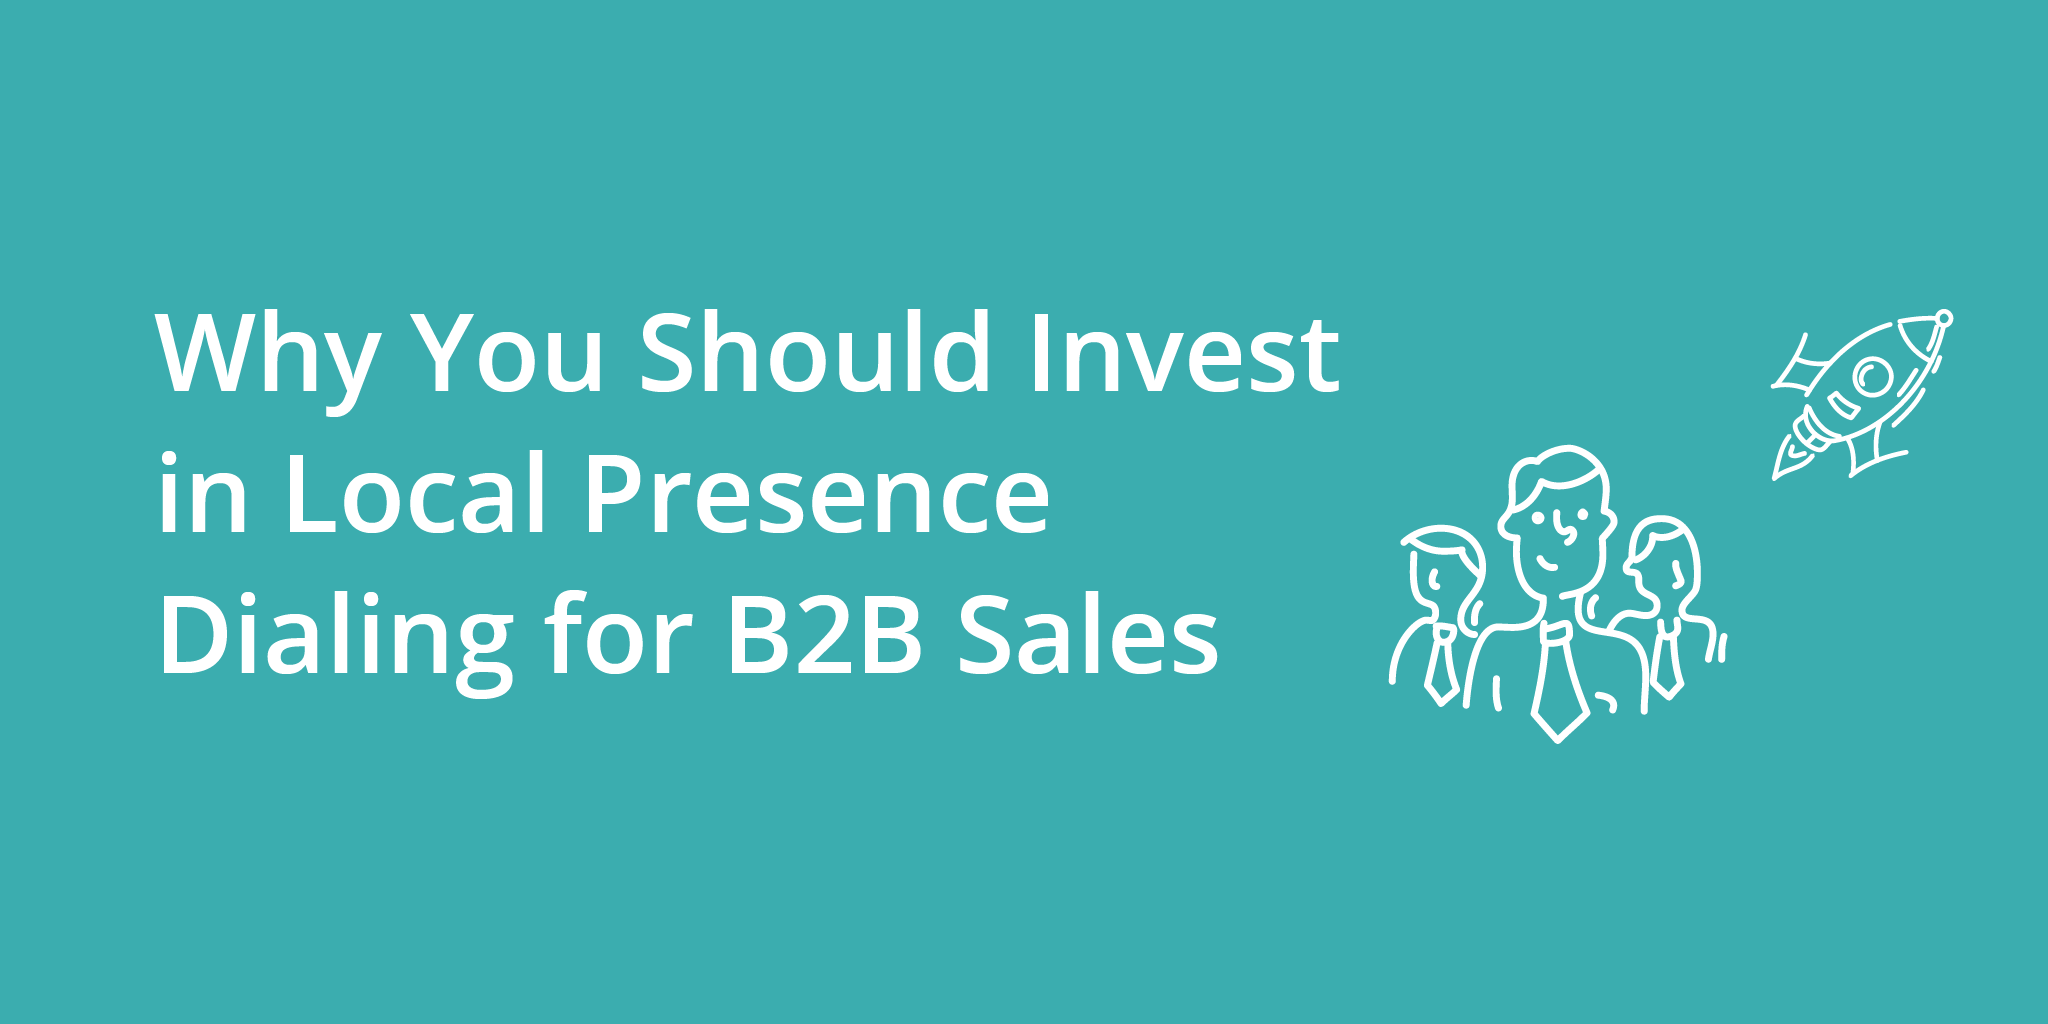 Why You Should Invest in Local Presence Dialing for B2B Sales